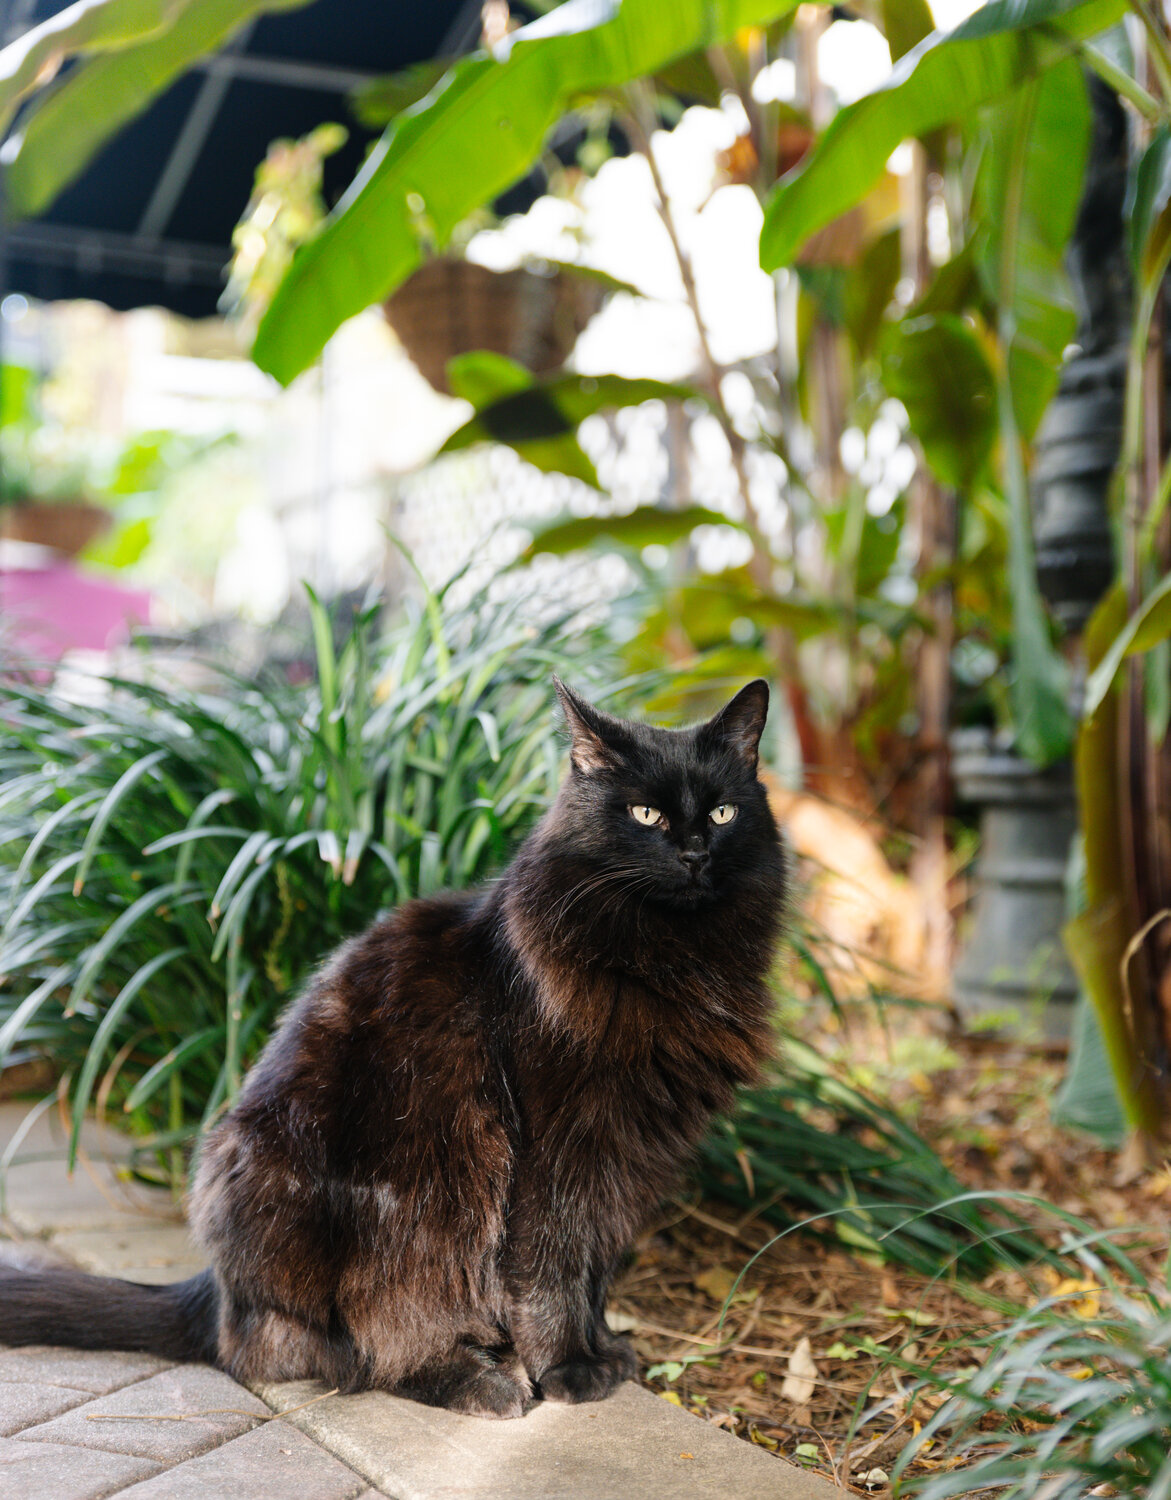 On the other side of the French Quarter beside Panini Pete’s, a black Maine coon cat named Fancy makes her house under a black tent with her own bed, food and treats.